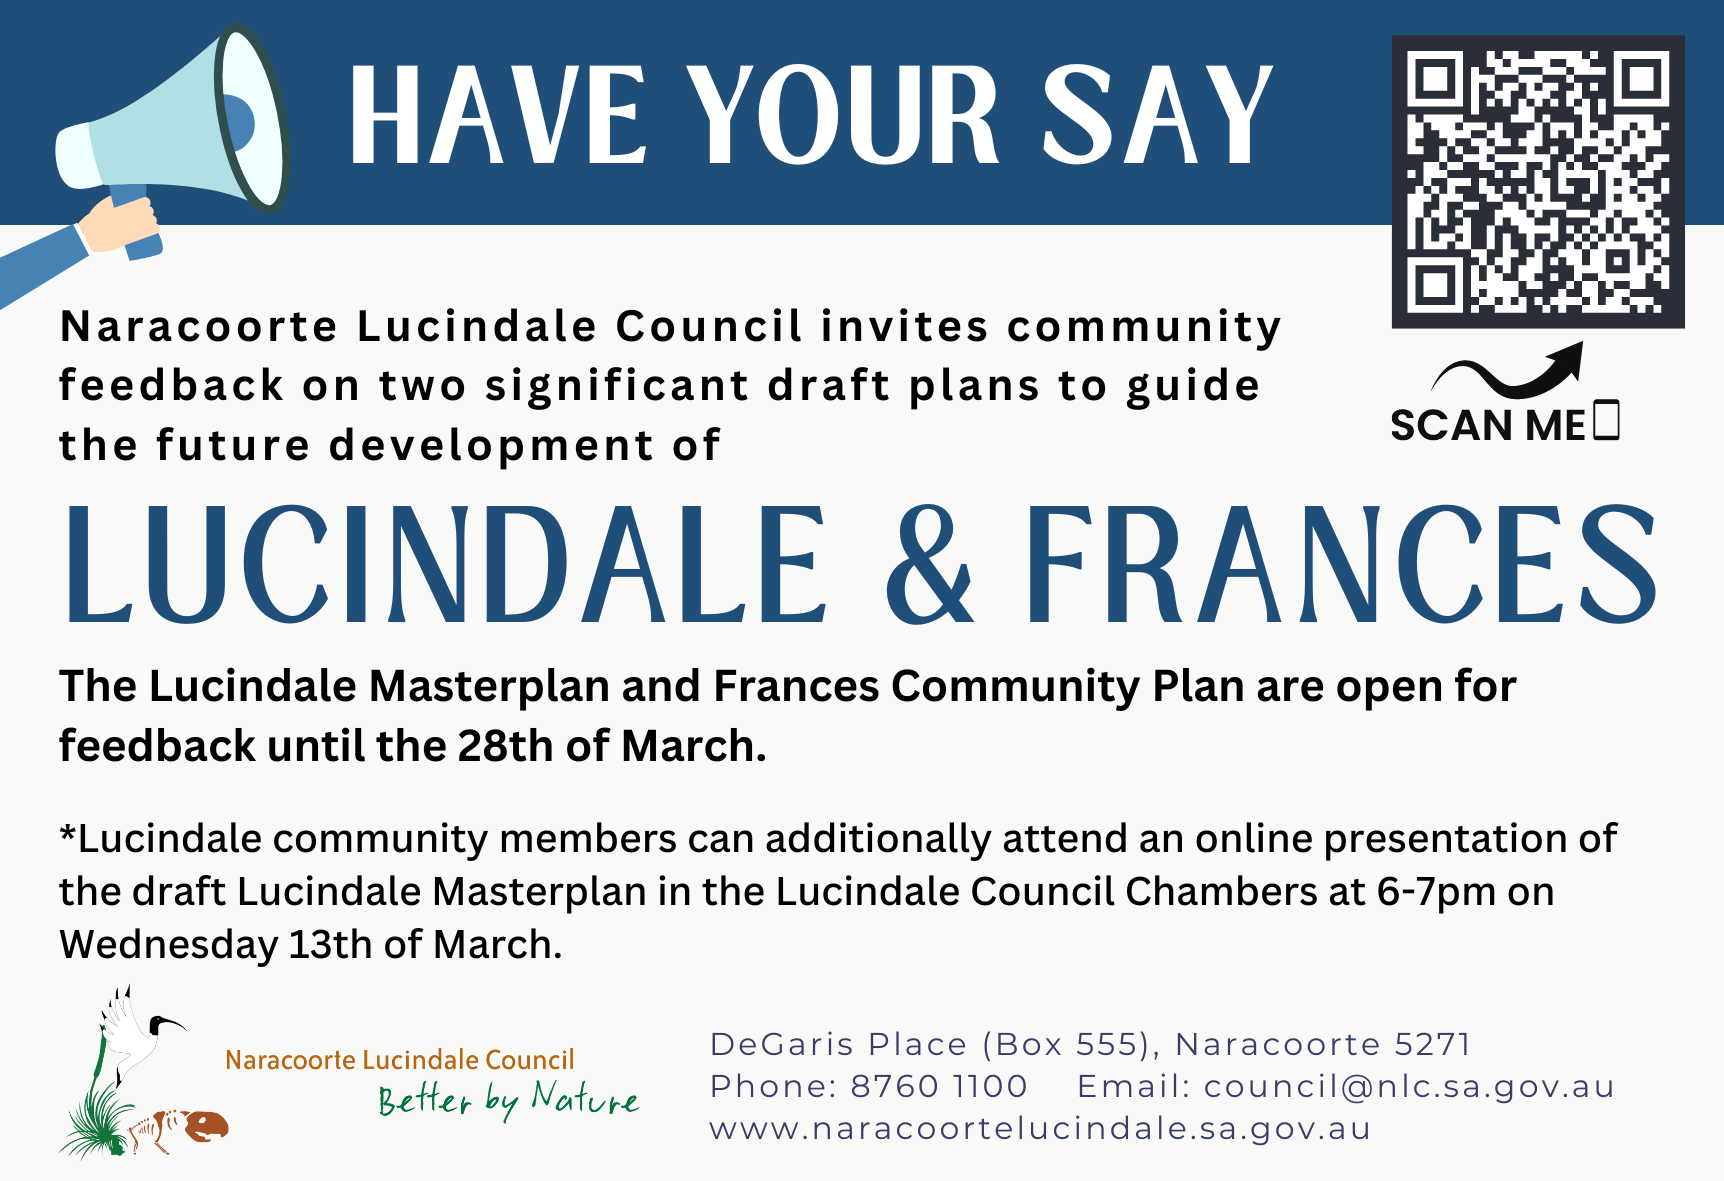 Lucindale and Frances draft plans